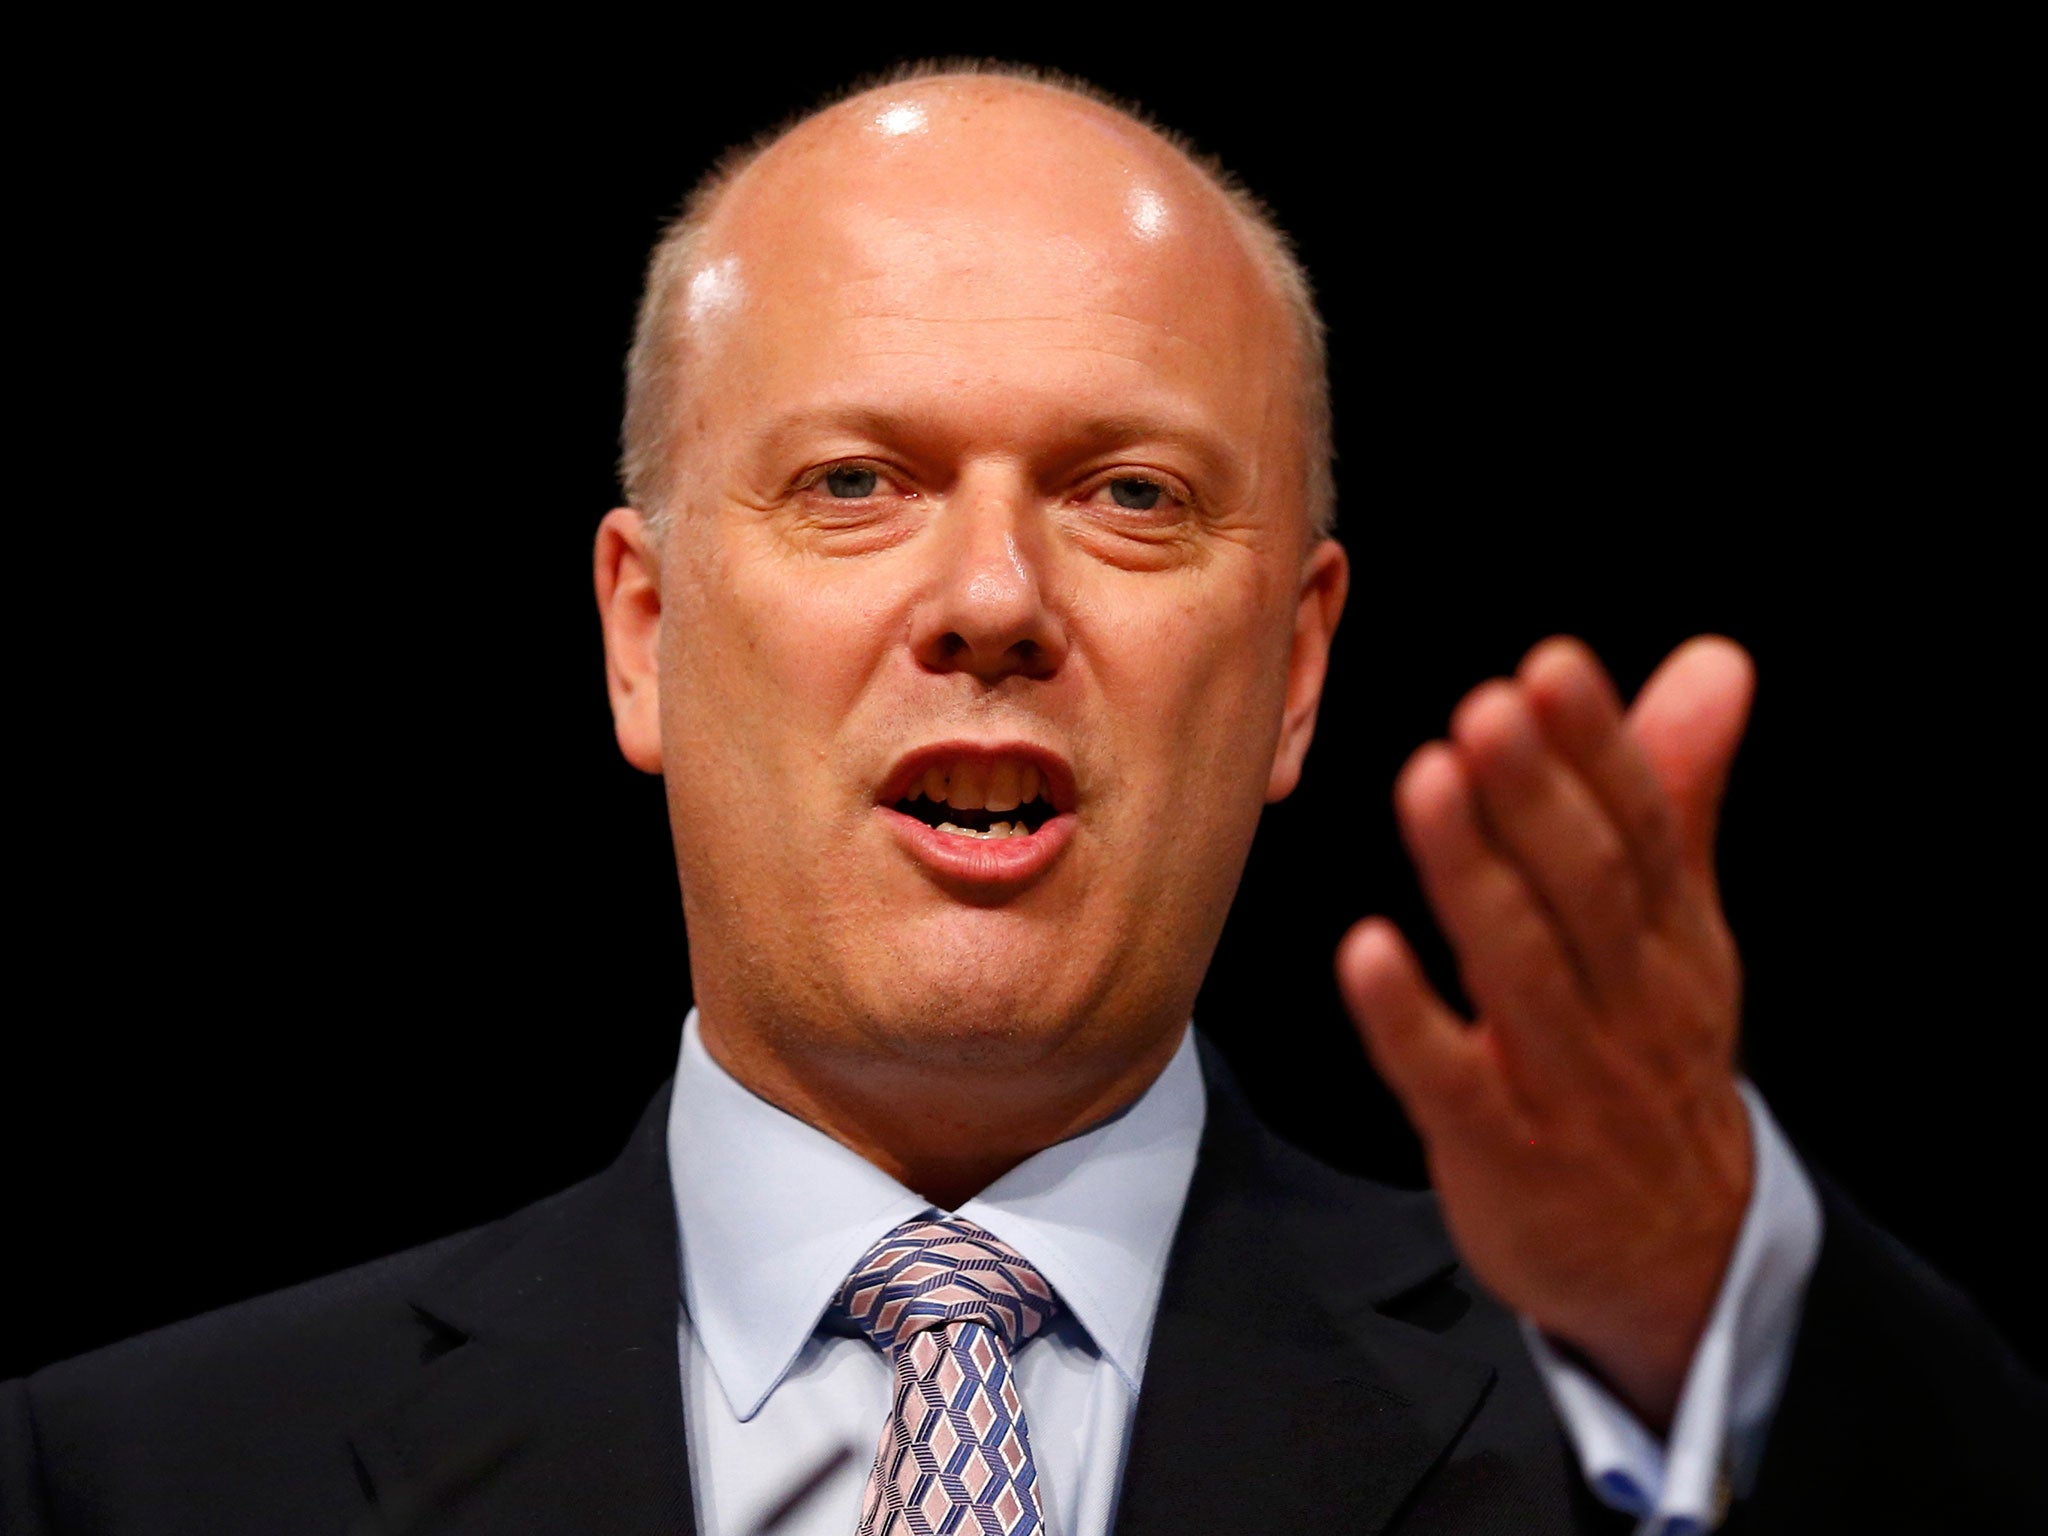 EU referendum: Chris Grayling asked David Cameron for assurance he would not be sacked after ...